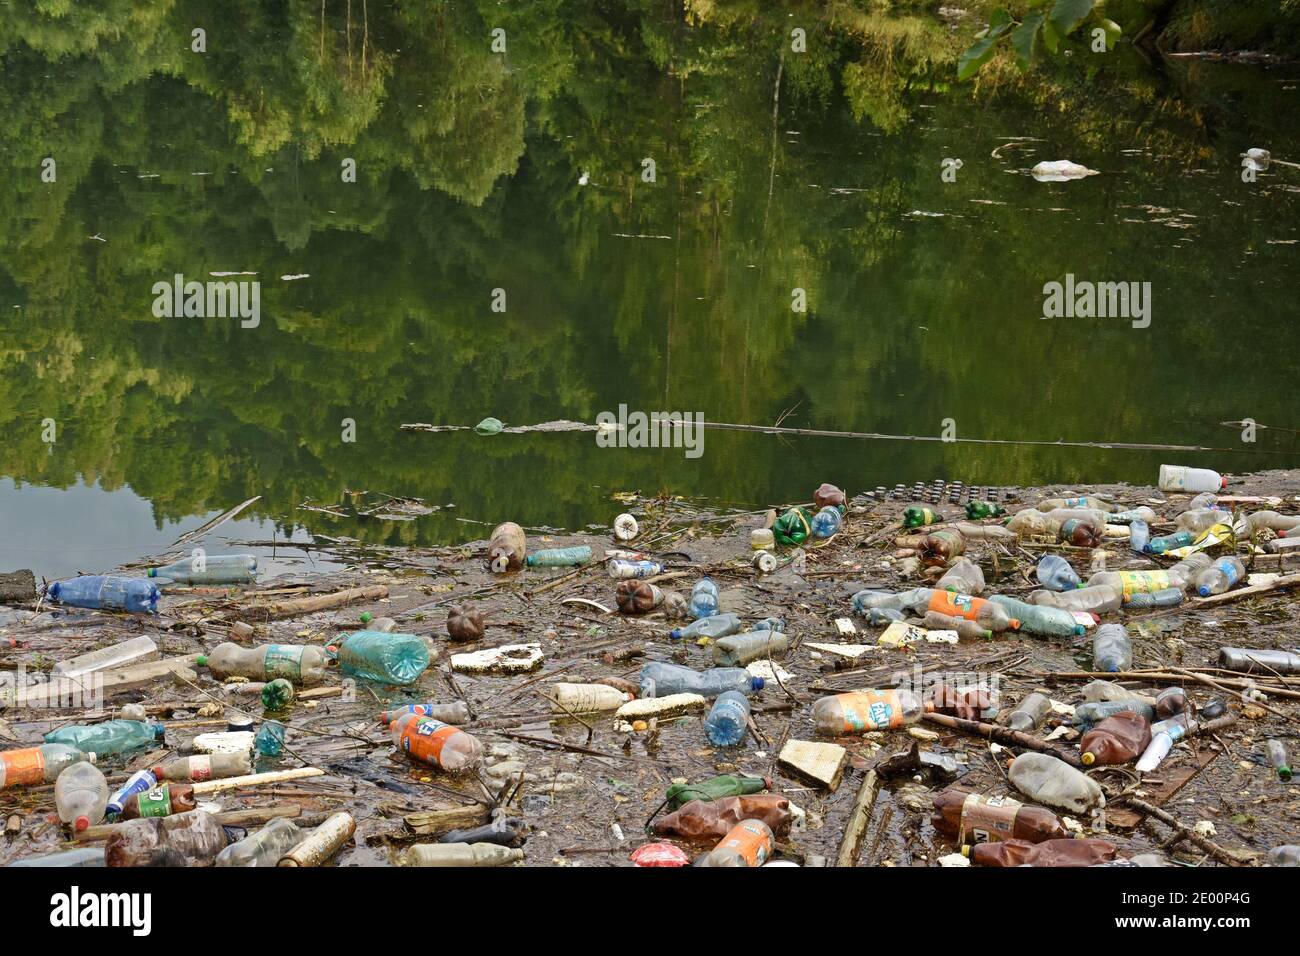 Environment pollution. Lake with plastic bottles and garbage in the mountains. Stock Photo